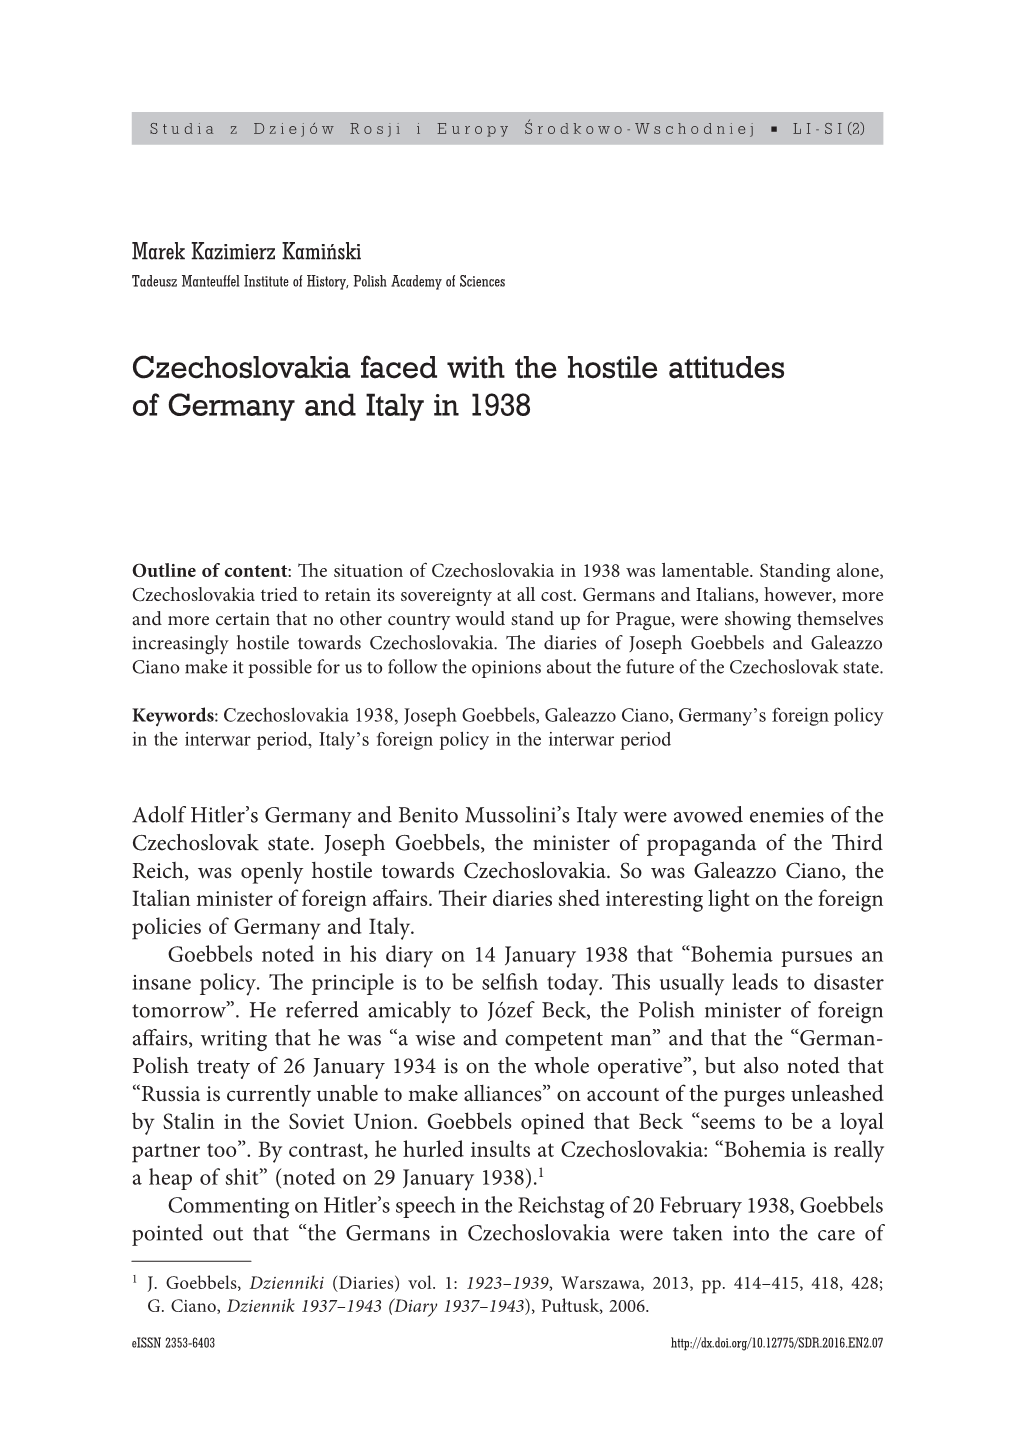 Czechoslovakia Faced with the Hostile Attitudes of Germany and Italy in 1938